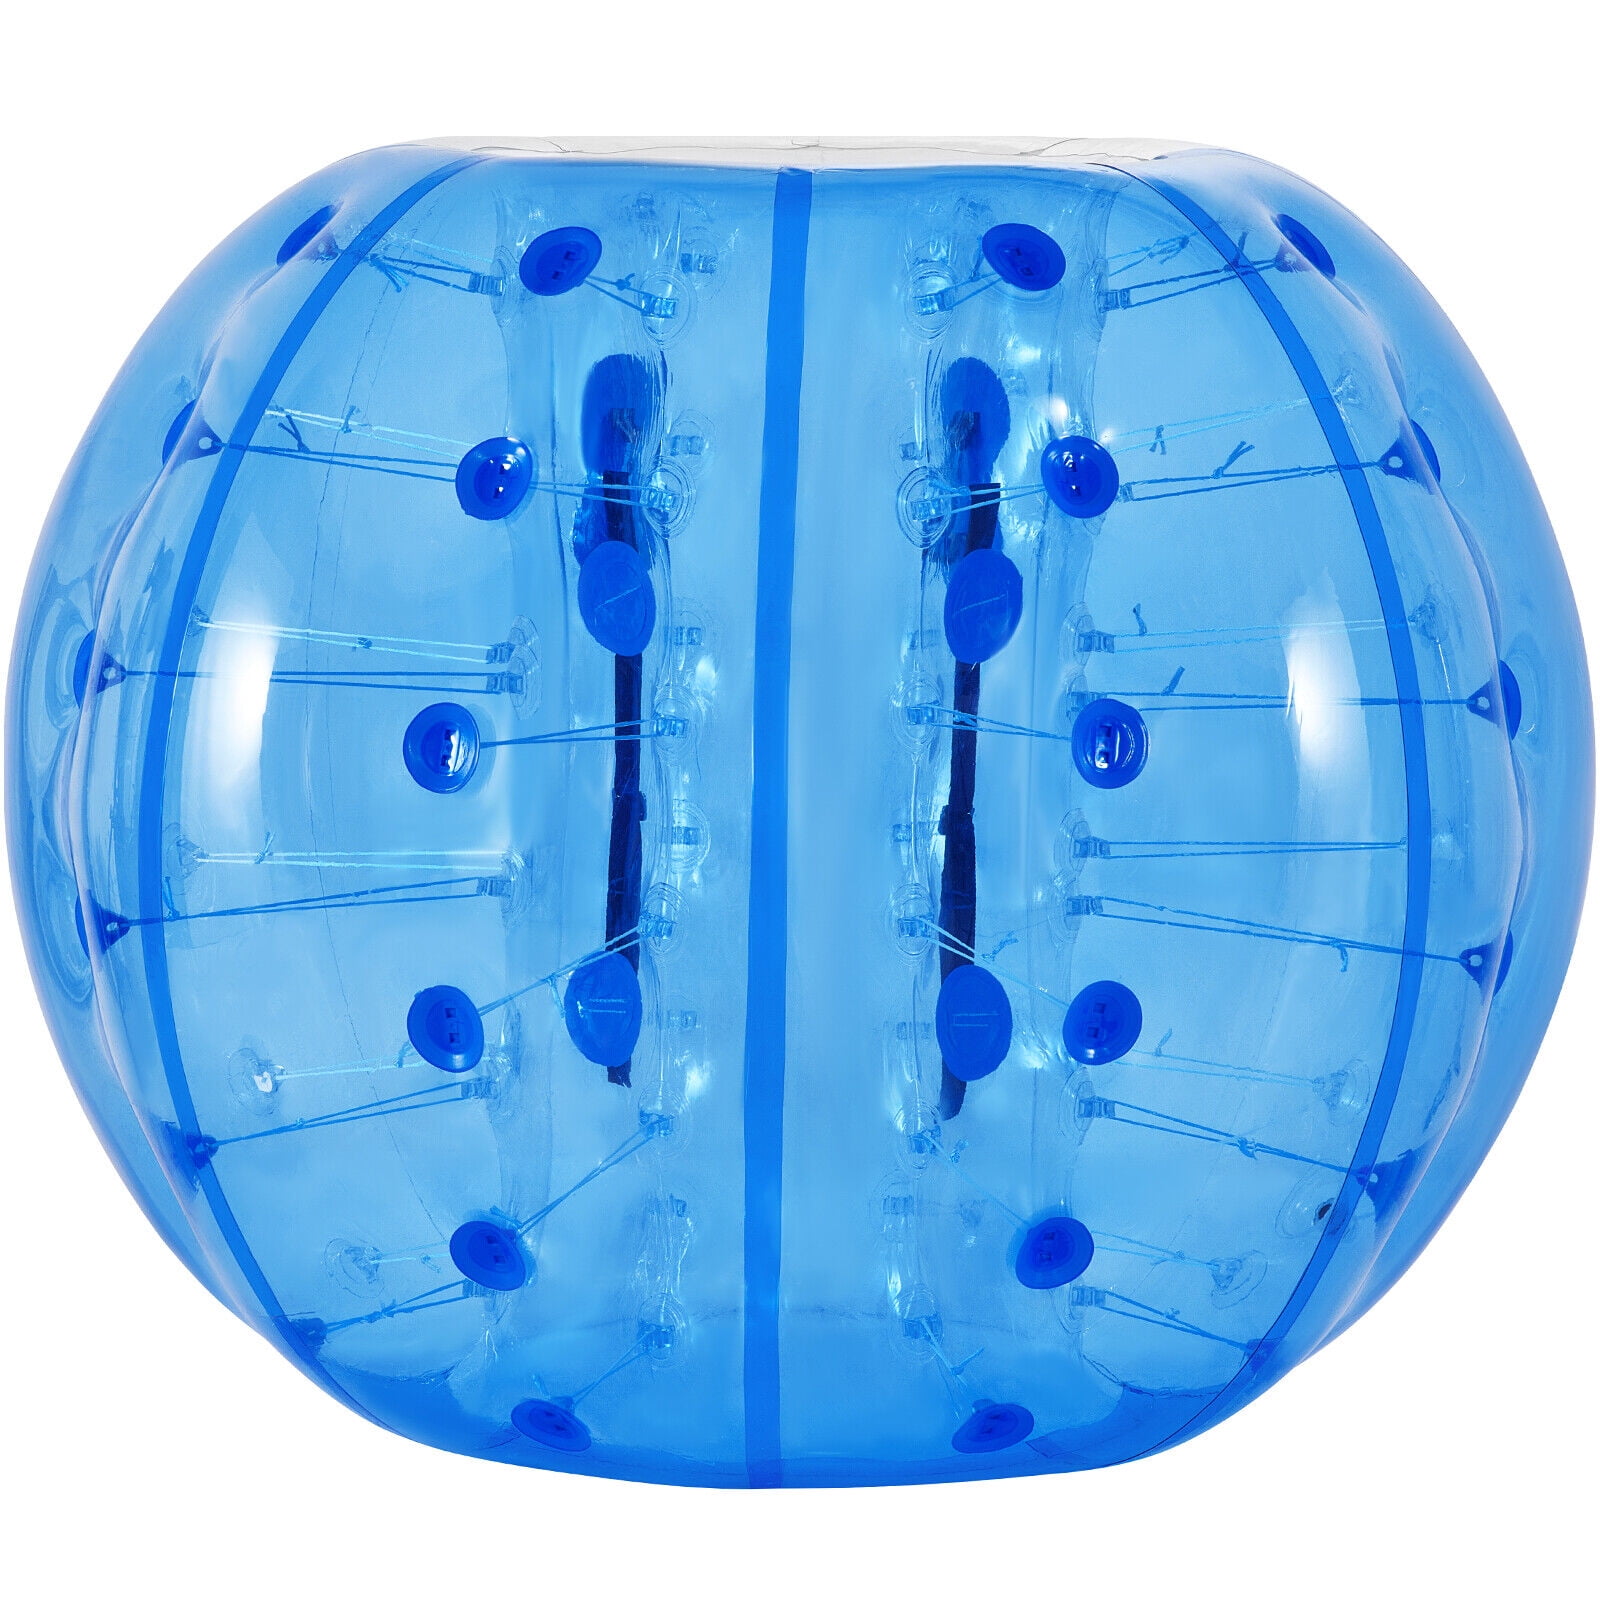 : SZCQ Inflatable Bumper ONLY ONE Ball 1.5M/5ft Diameter Adults  Kids Bubble Soccer Balls Blow Up Toy Playground Human Hamster Knocker  Outdoor Zorb : Toys & Games